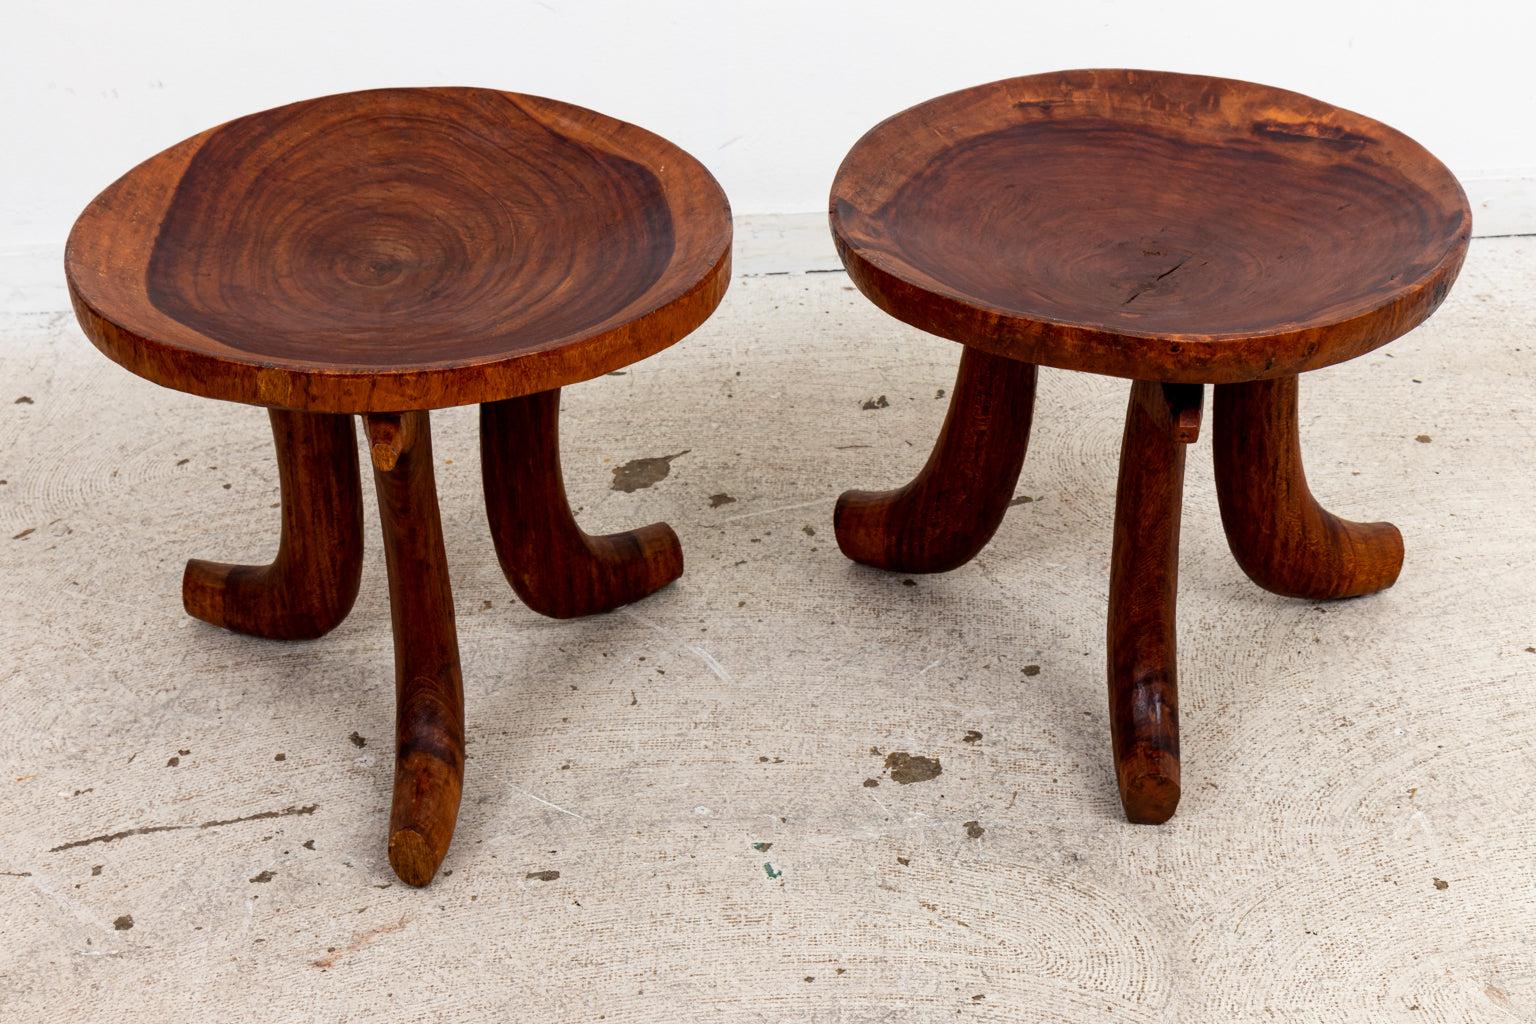 A pair of African sculptural dish form stools. Note of wear consistent with age.